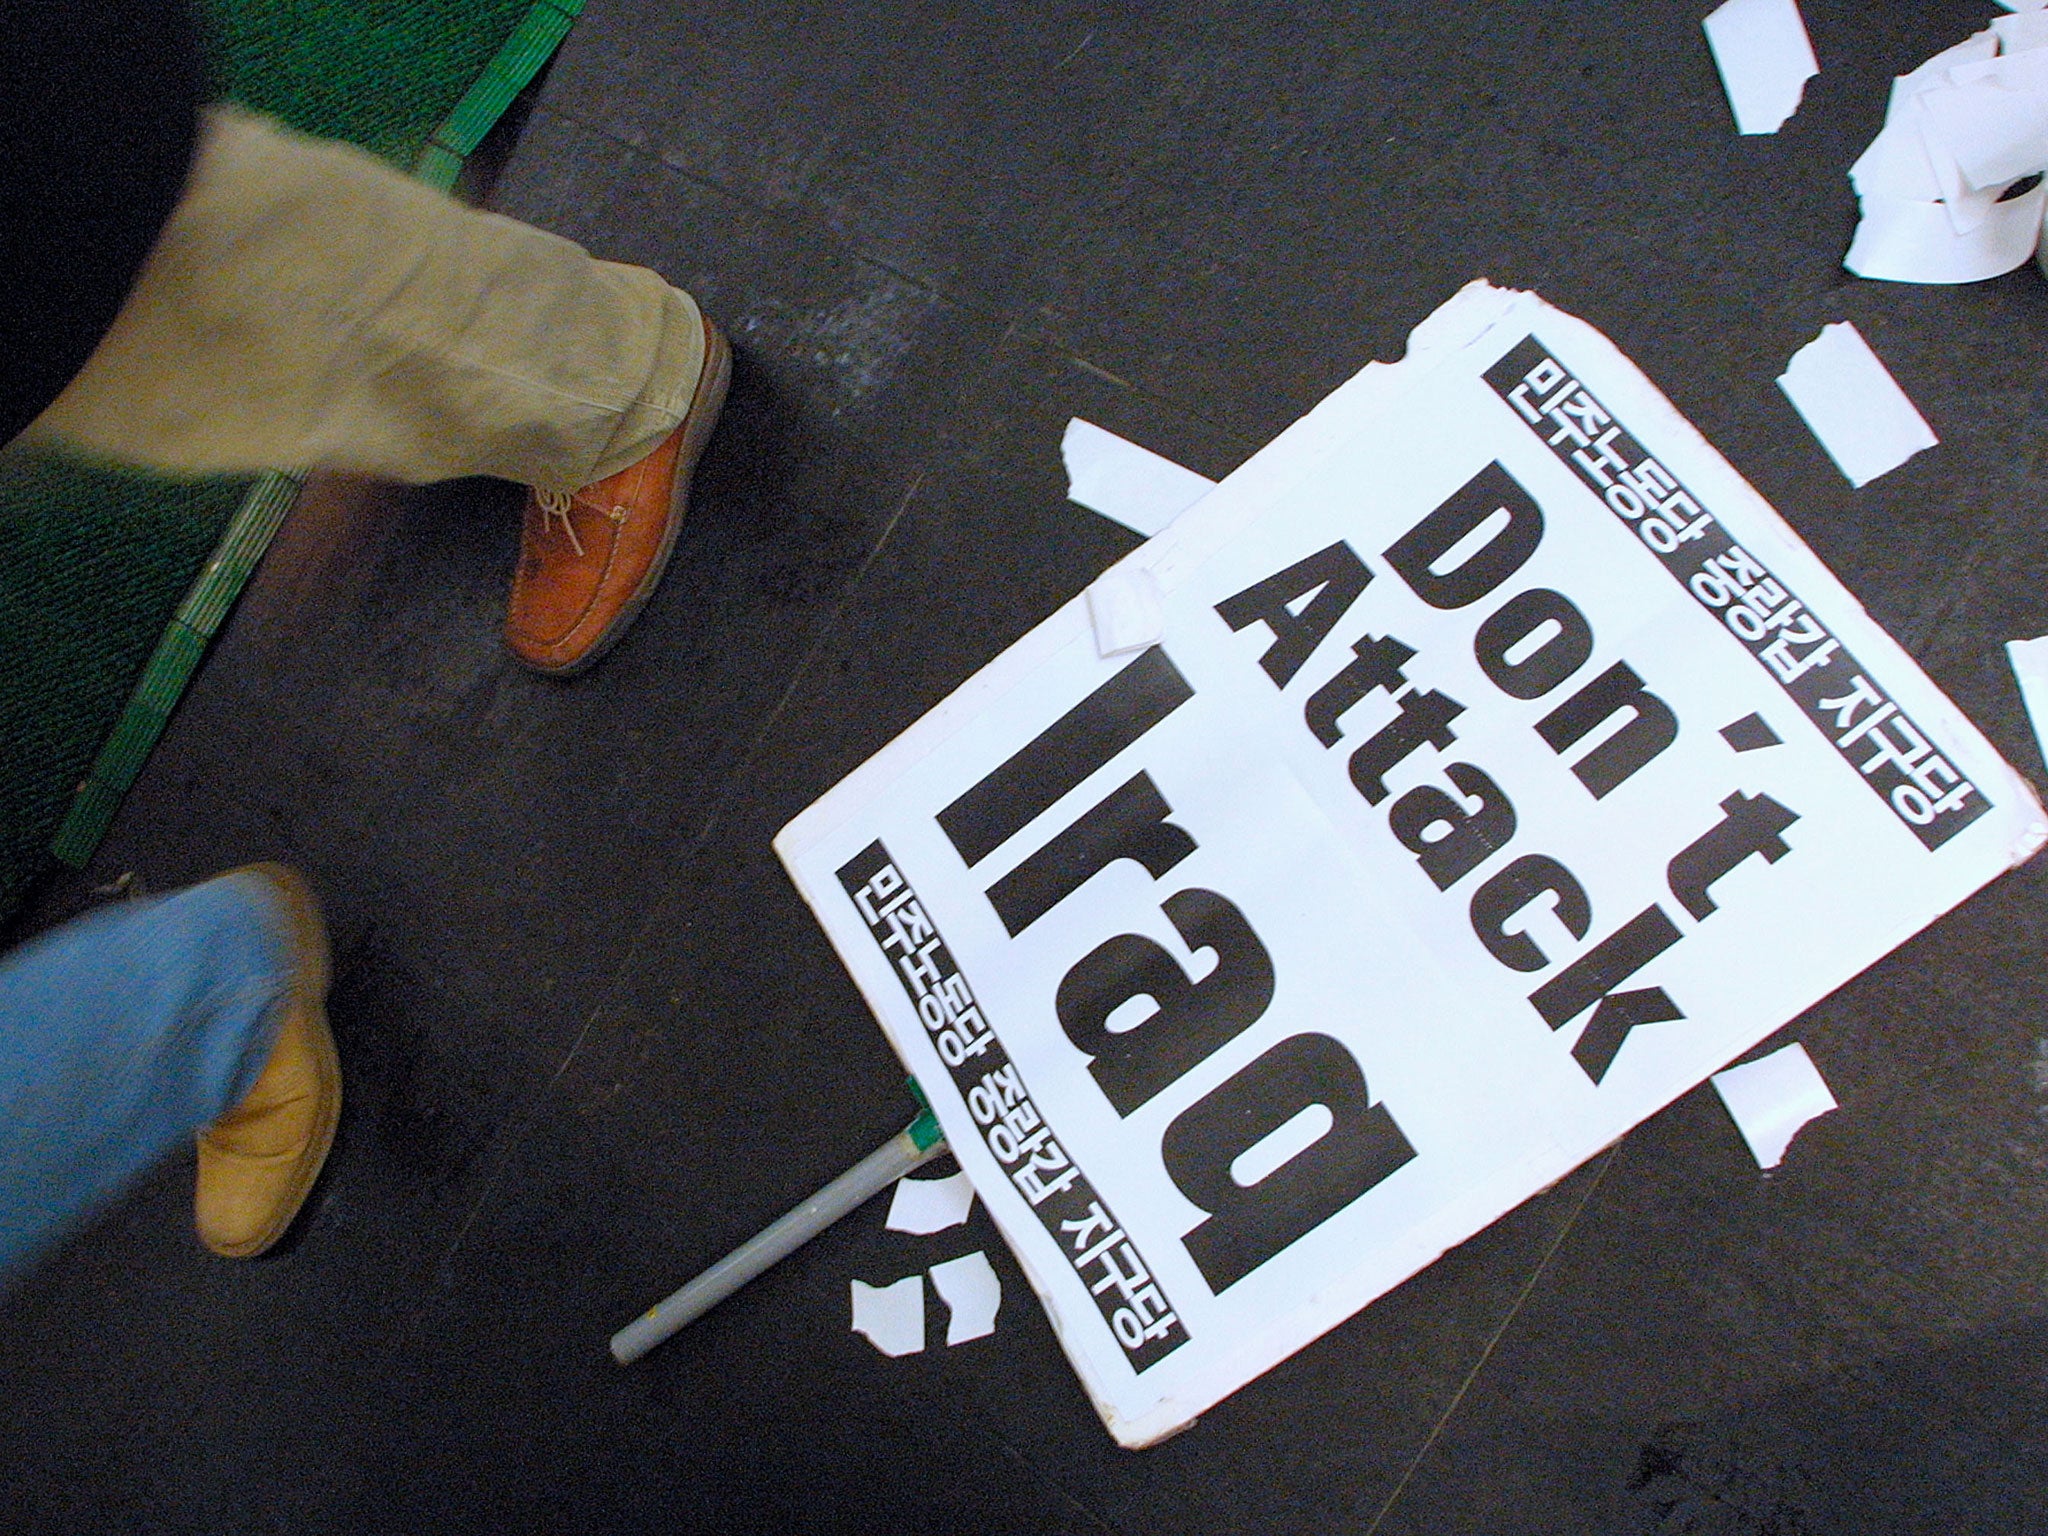 Pedestrians pass by anti-war posters during a candlelight protest against the U.S. near the U.S. embassy January 4, 2003 in Seoul, South Korea.